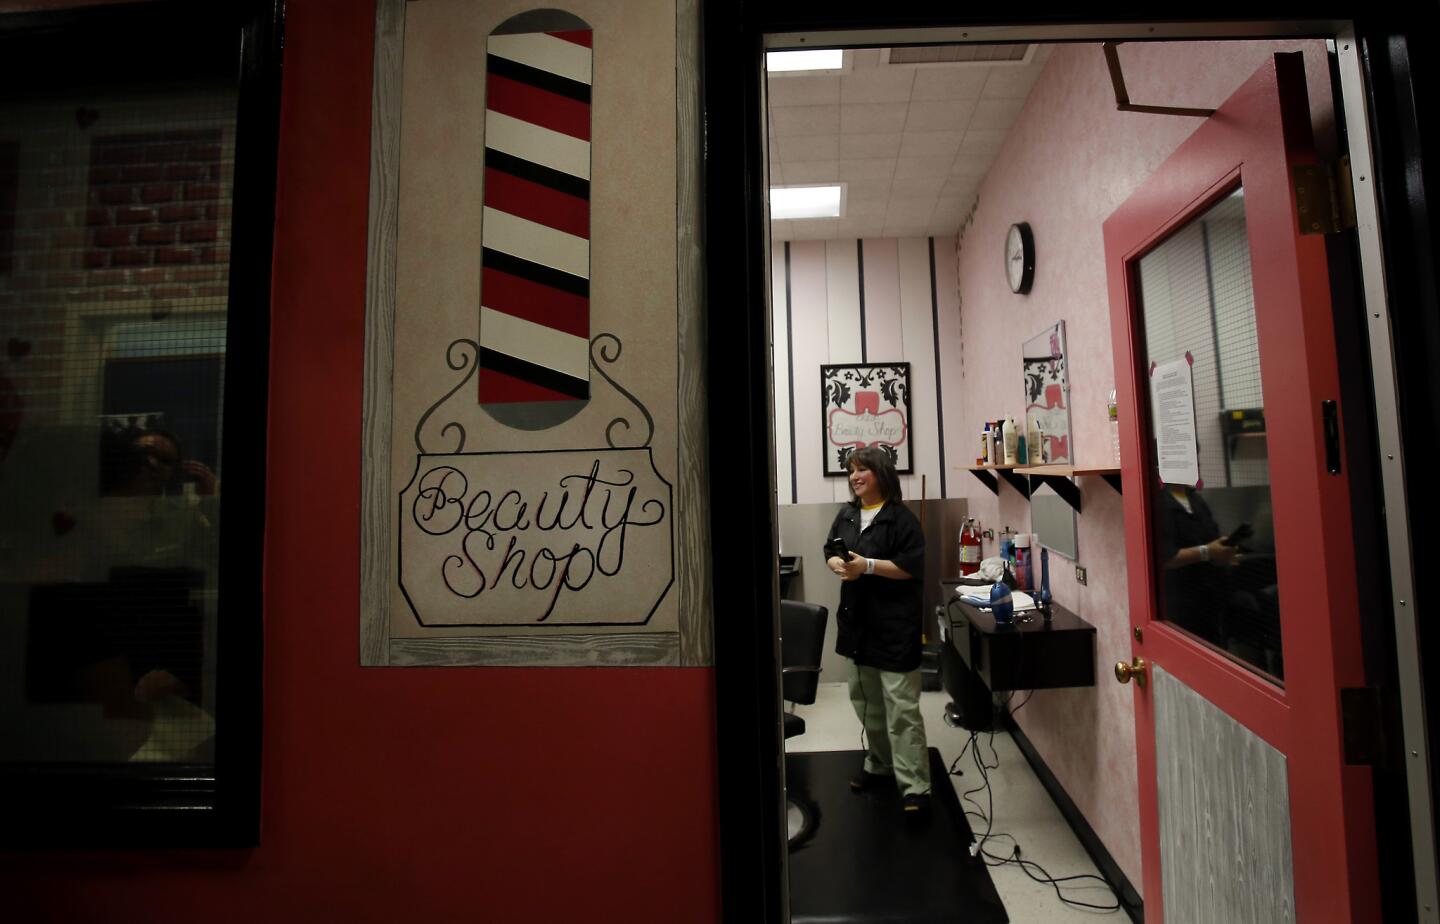 Inmate Alba Chavez stands in the beauty salon at the Century Regional Detention Facility, in Lynwood. The walls are painted in pink and gray stripes, and there is plenty of shampoo and hairspray to go around.